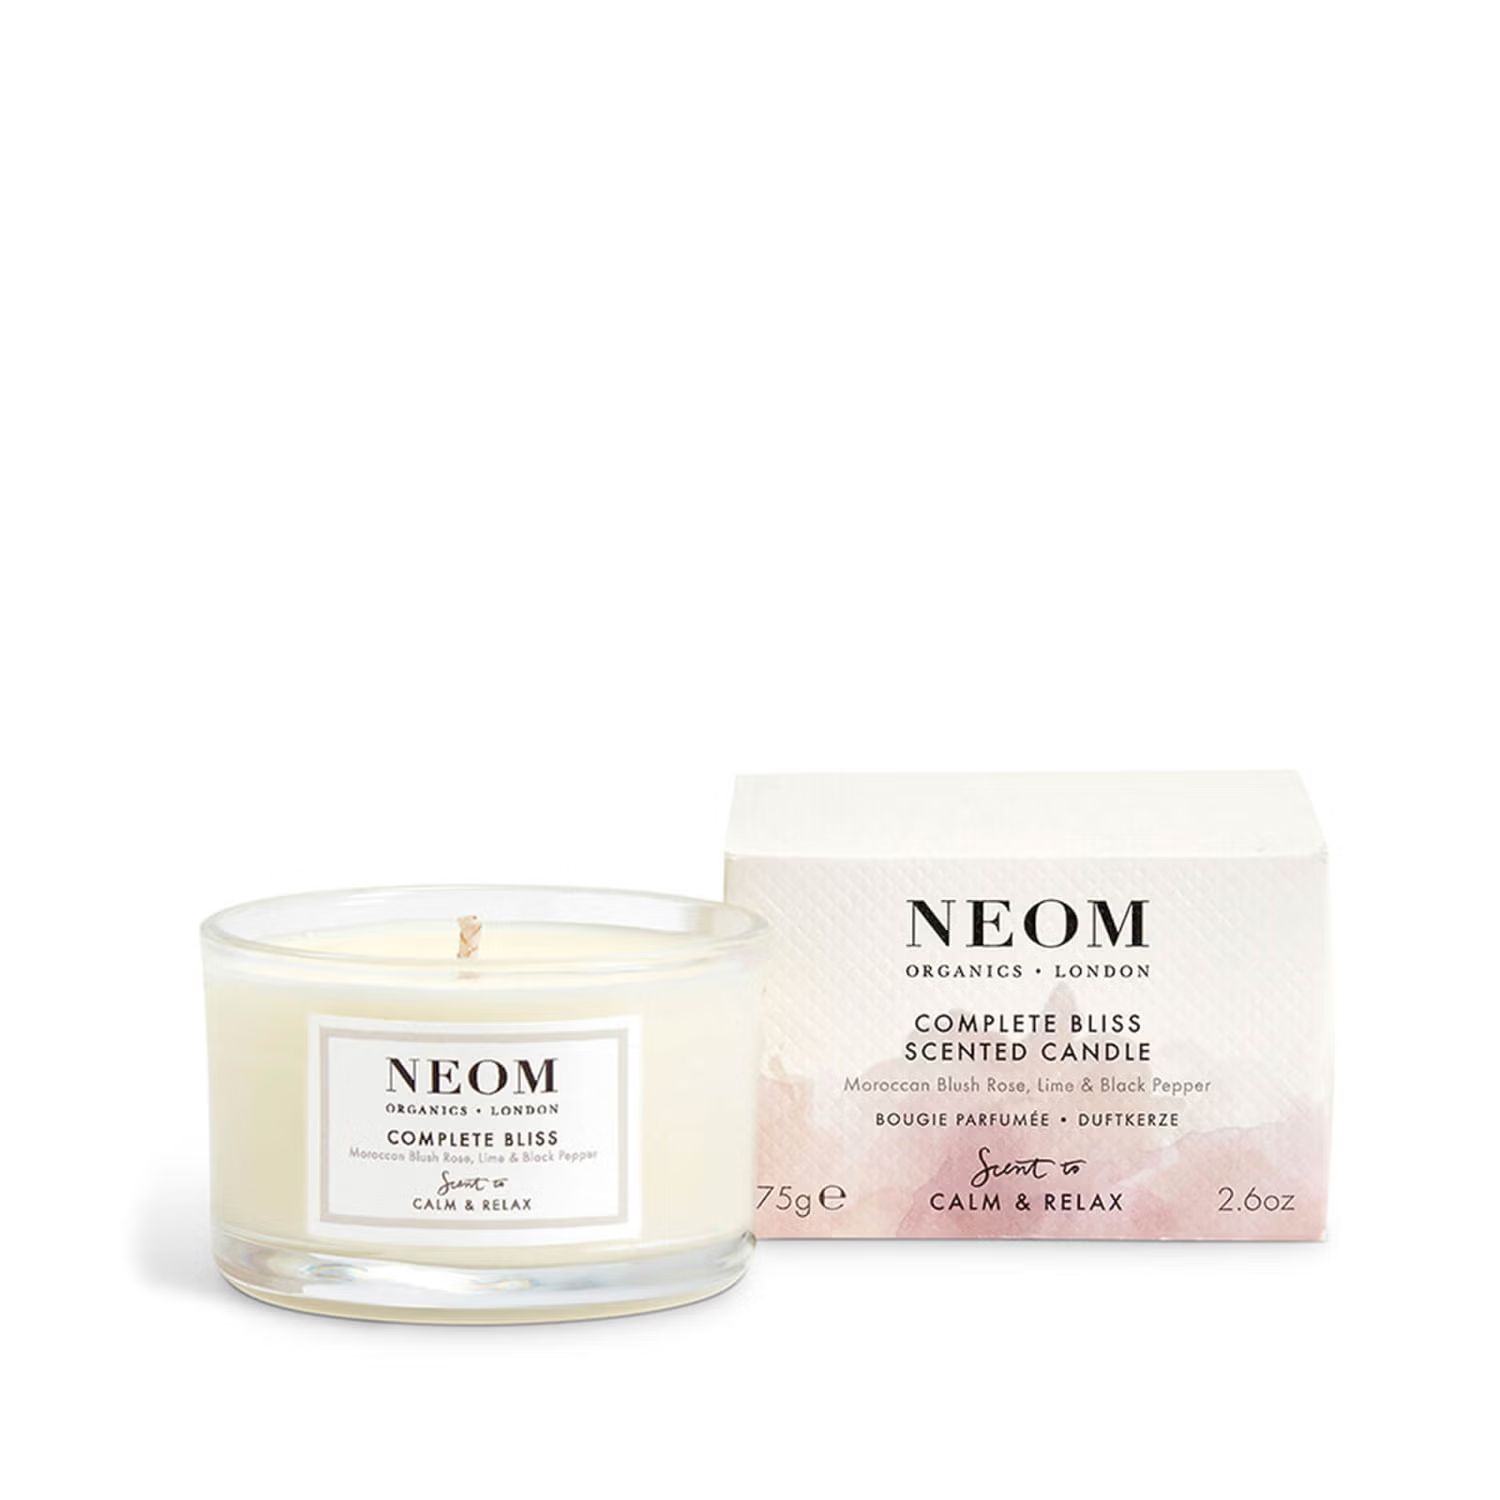 NEOM Organics Complete Bliss Travel Scented Candle | Look Fantastic (UK)